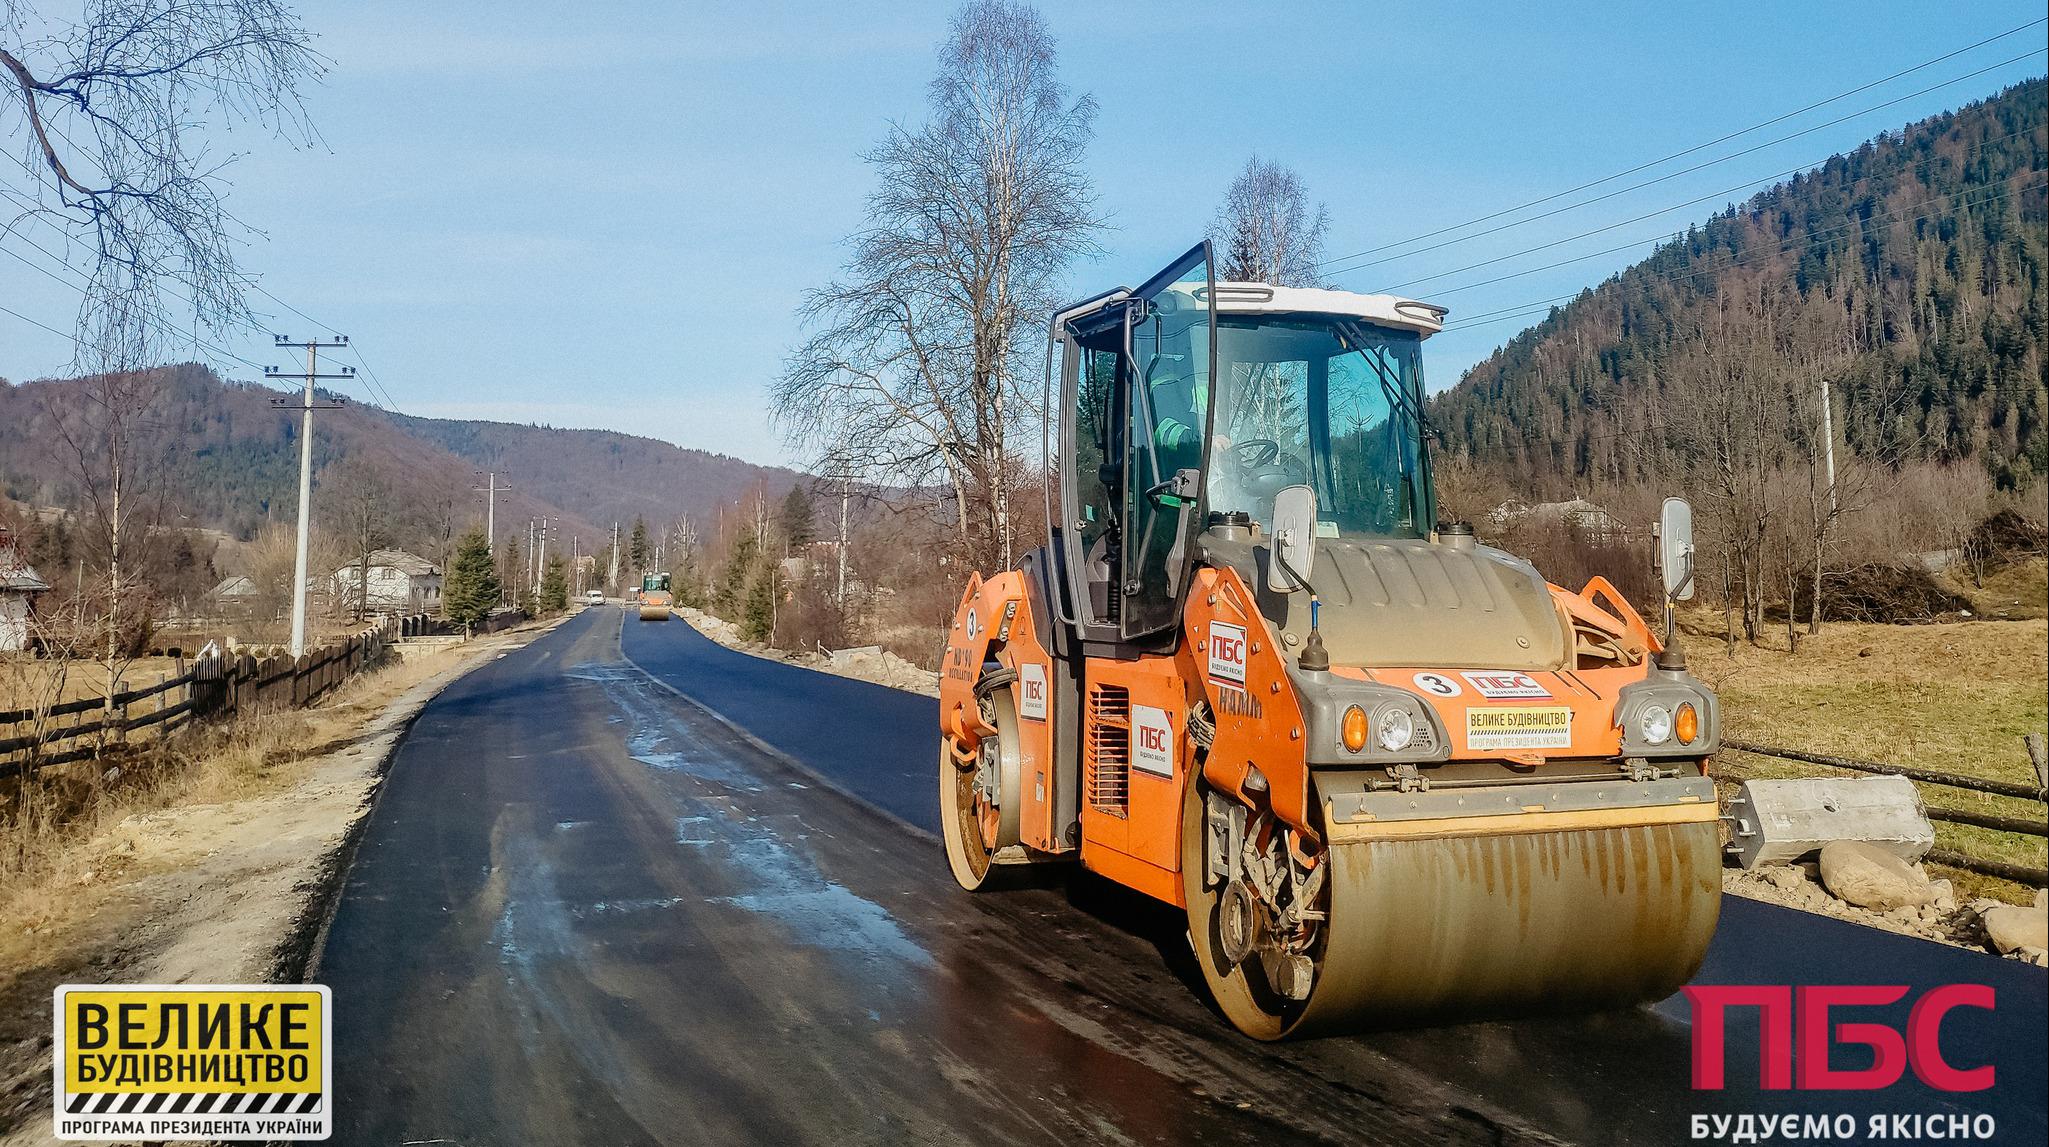 Road surface repairs completed in Huta village